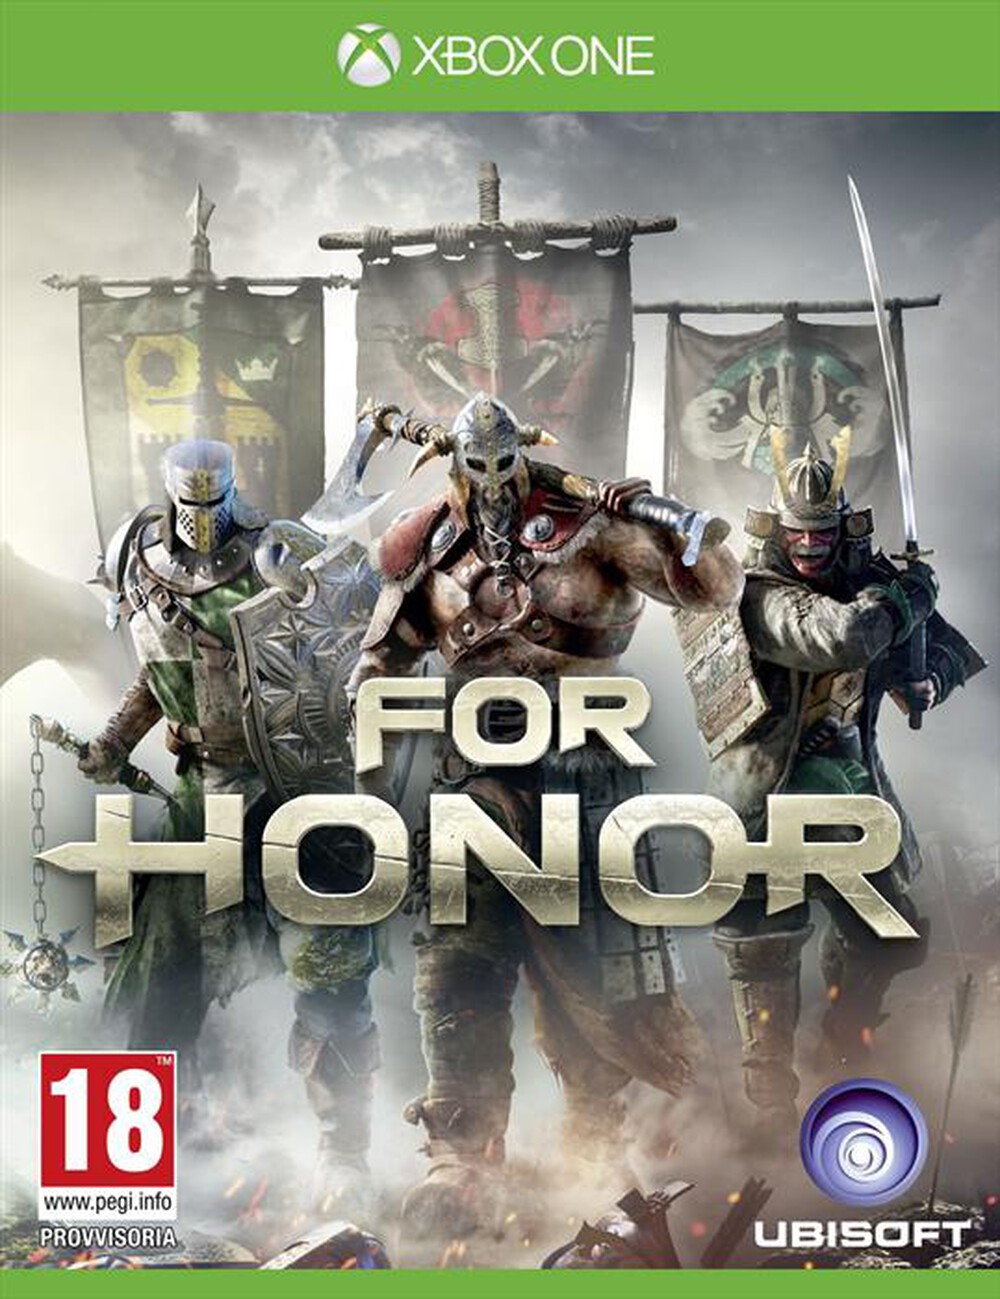 "UBISOFT - For Honor Xbox one"